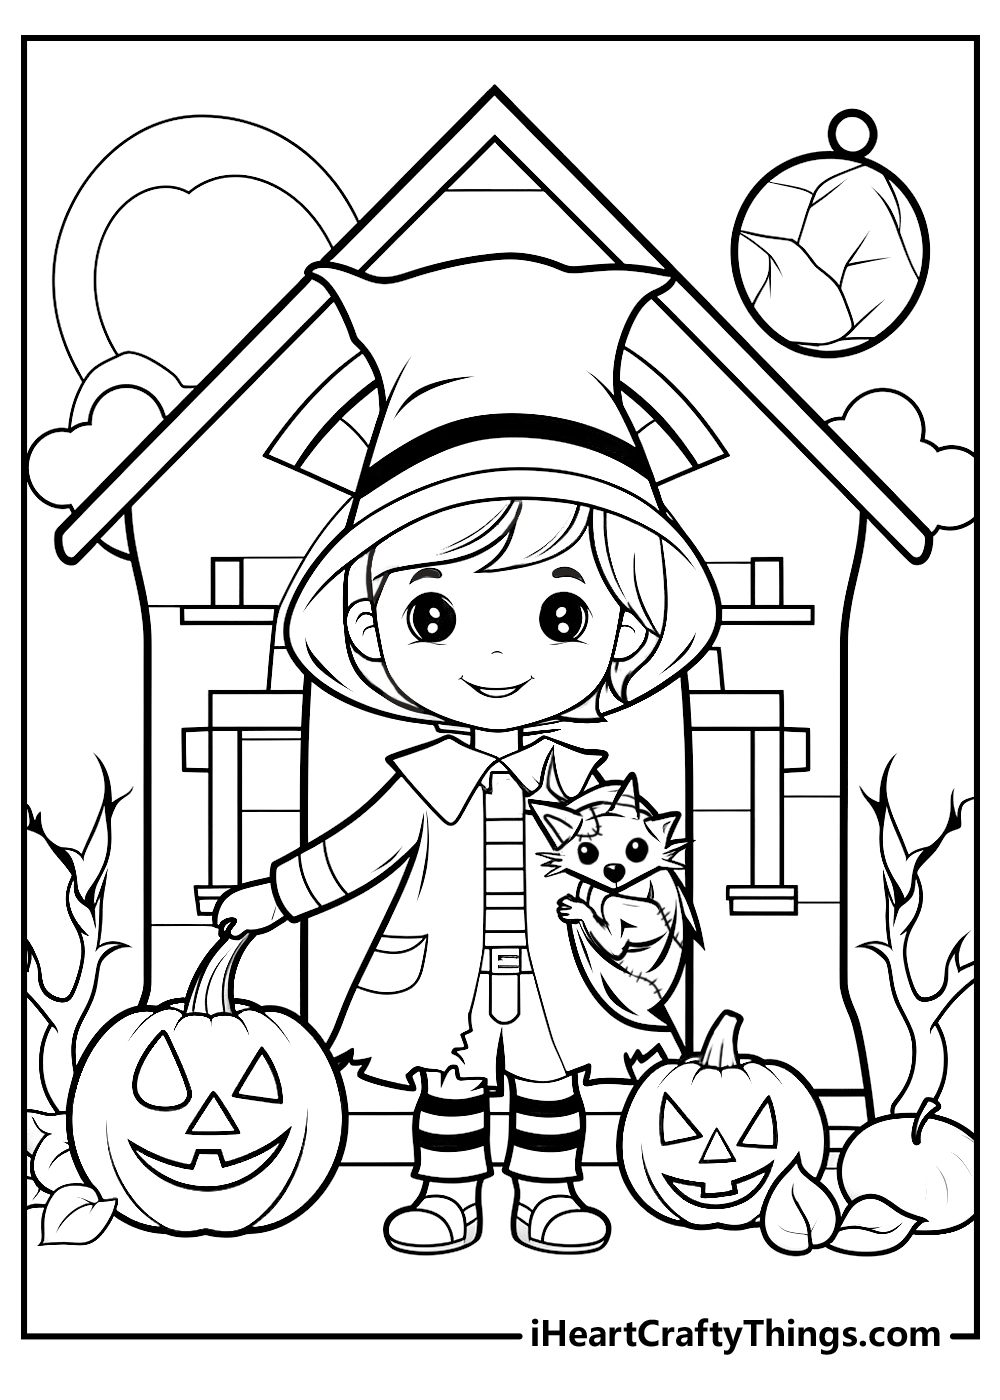 Printables) Or (100% Trick Treat Coloring Free Pages